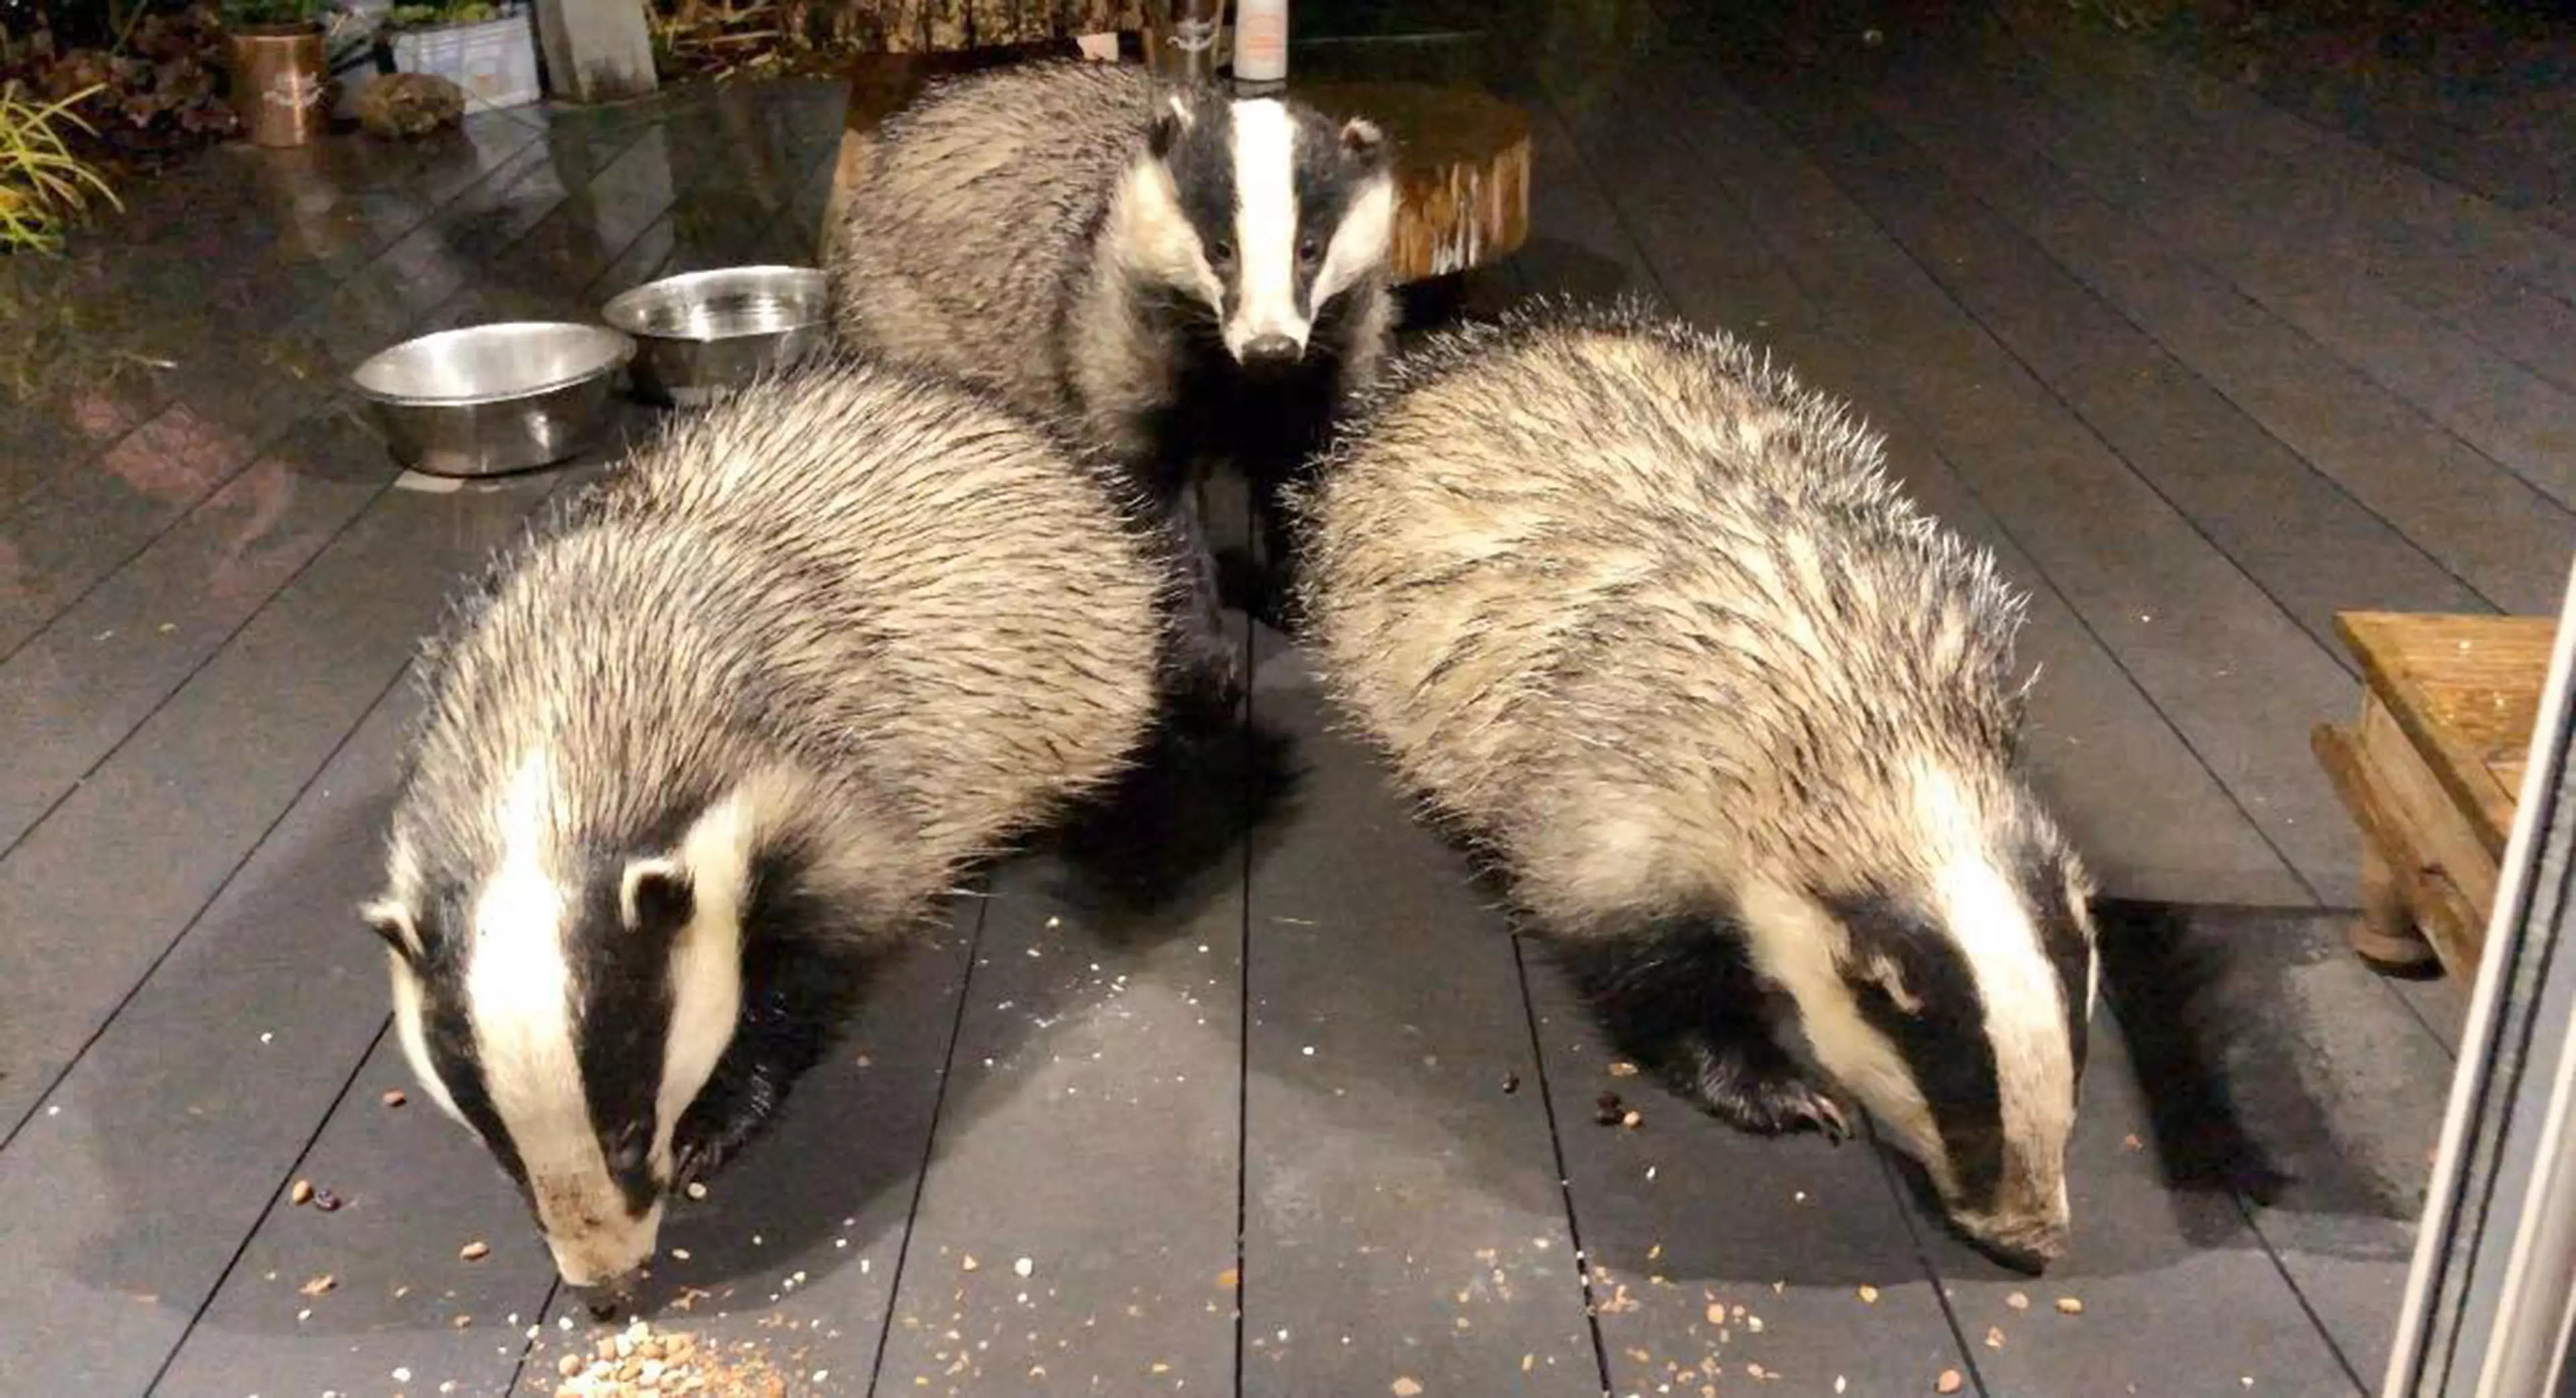 Christine noticed she had badgers living in her garden. (